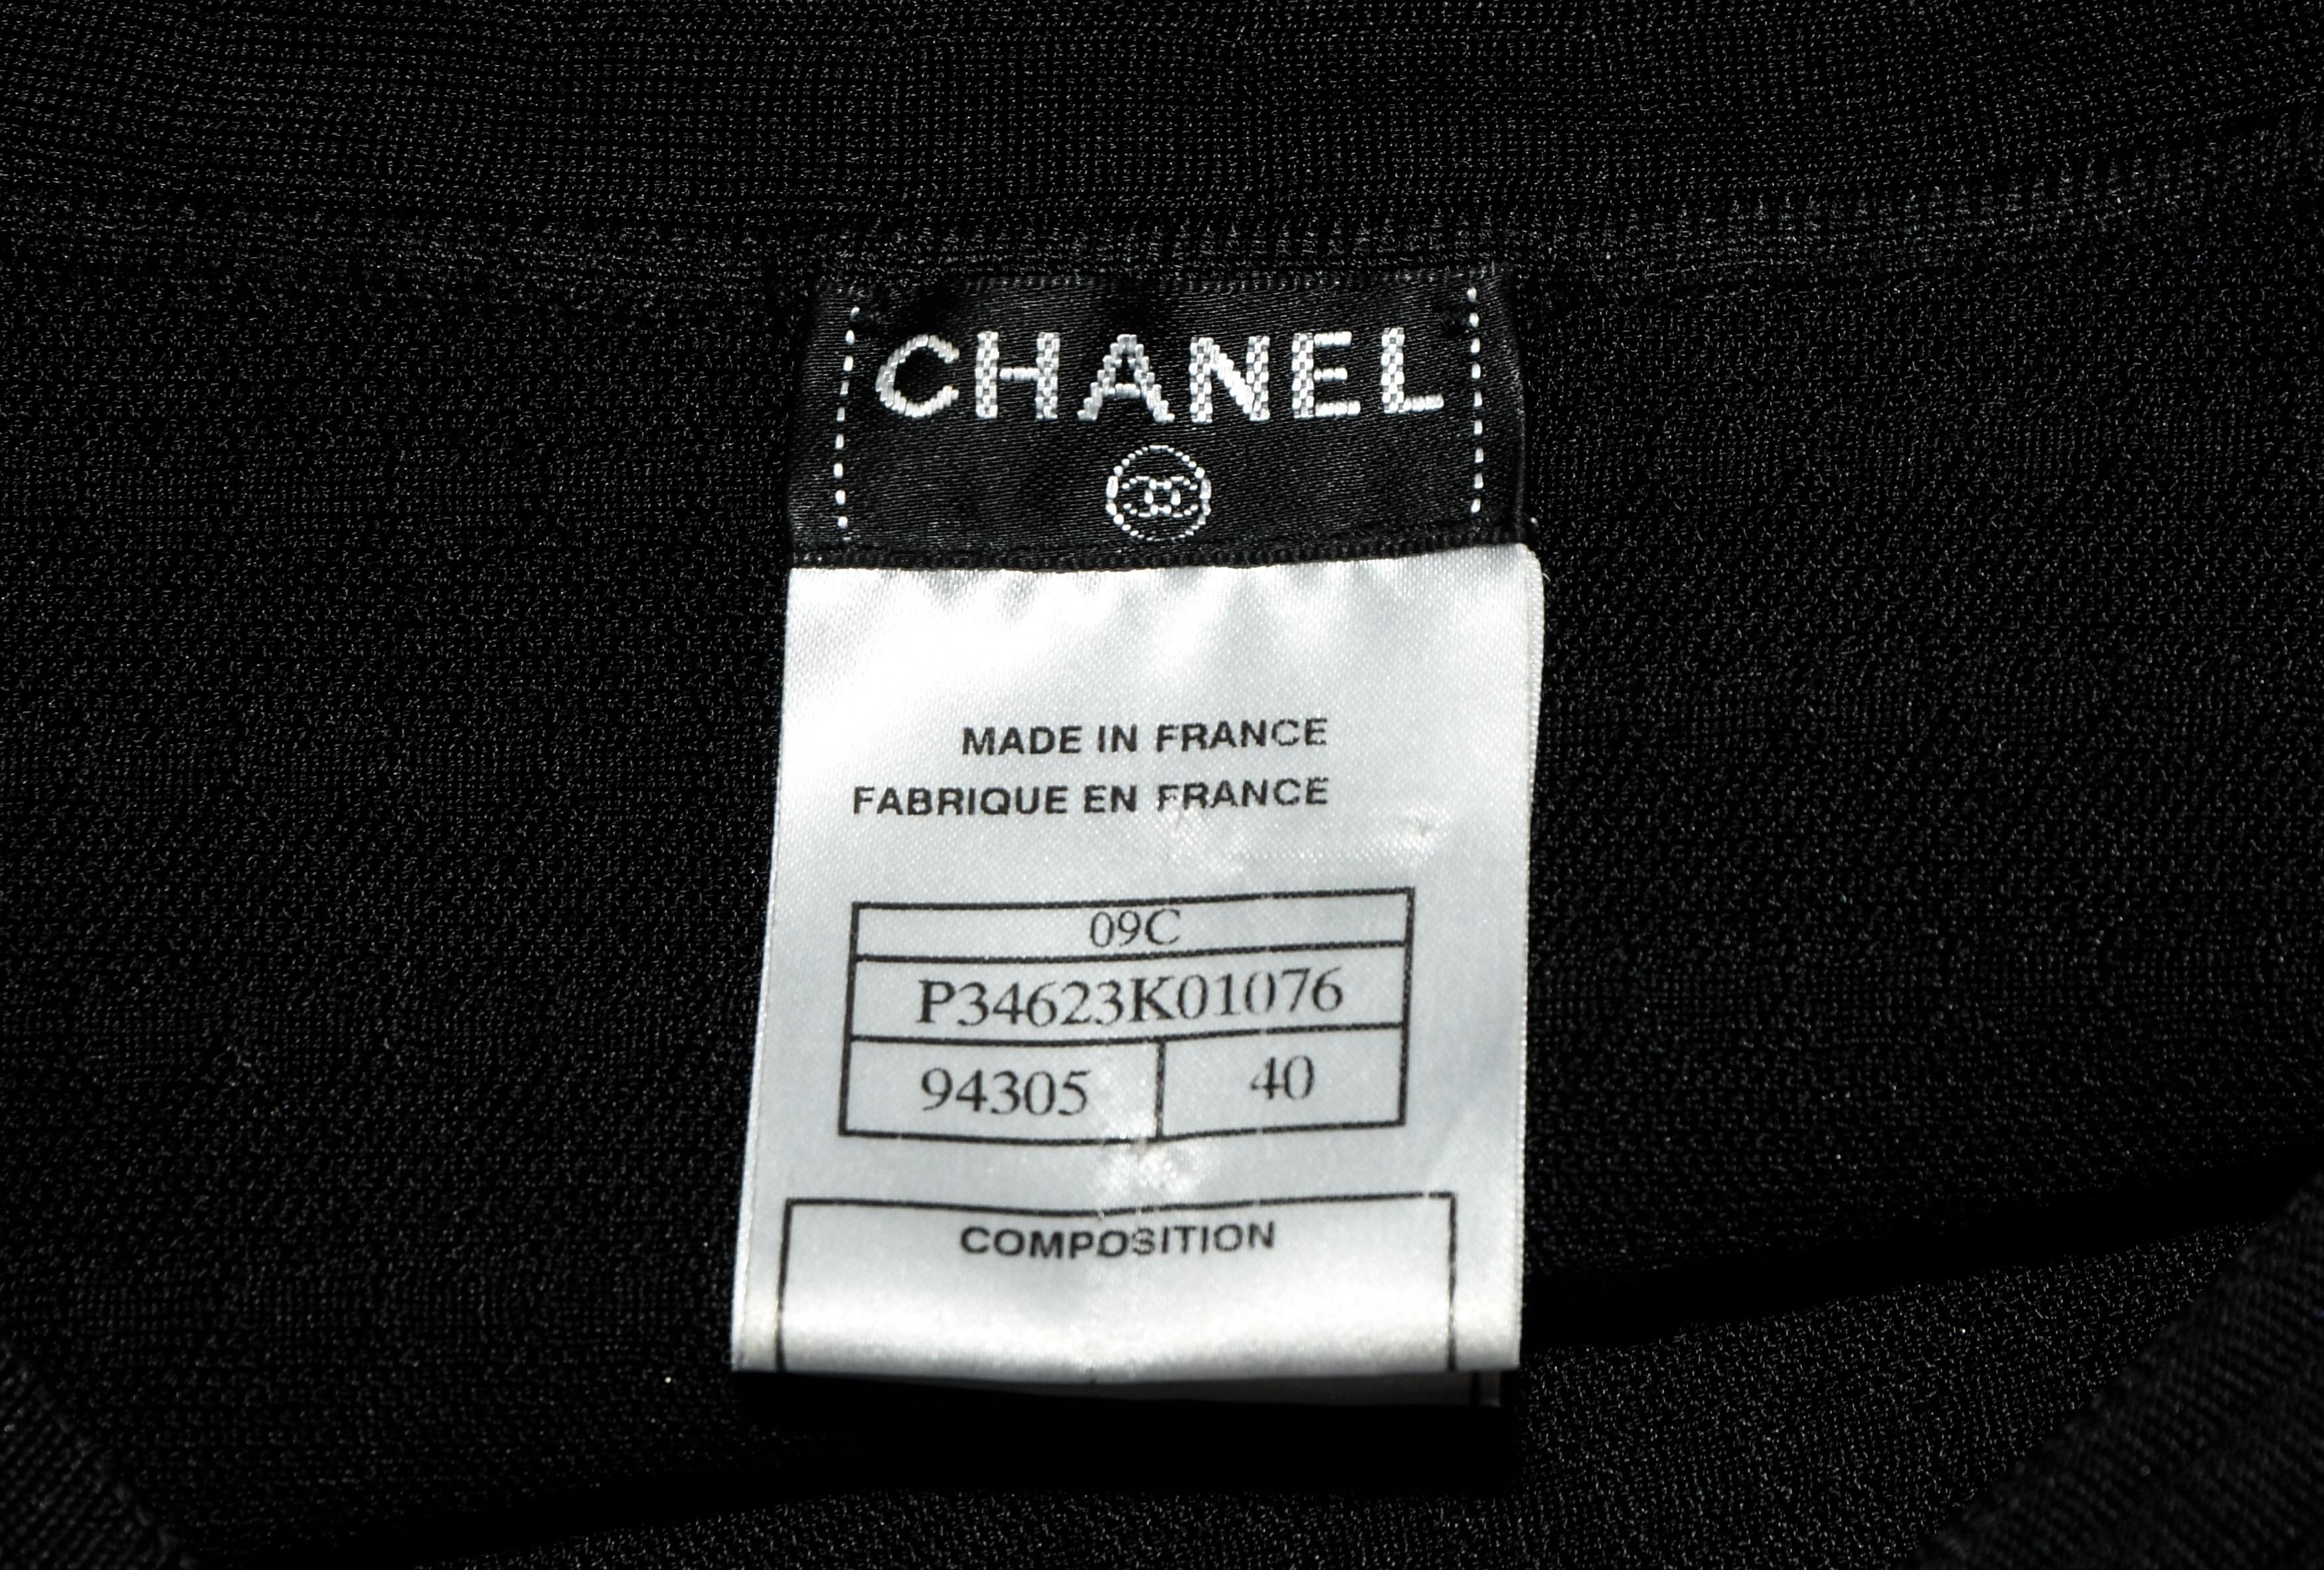 Chanel Black Knit Silk Blend Pleated Long Sleeve Dress 2009 Cruise Collection 1